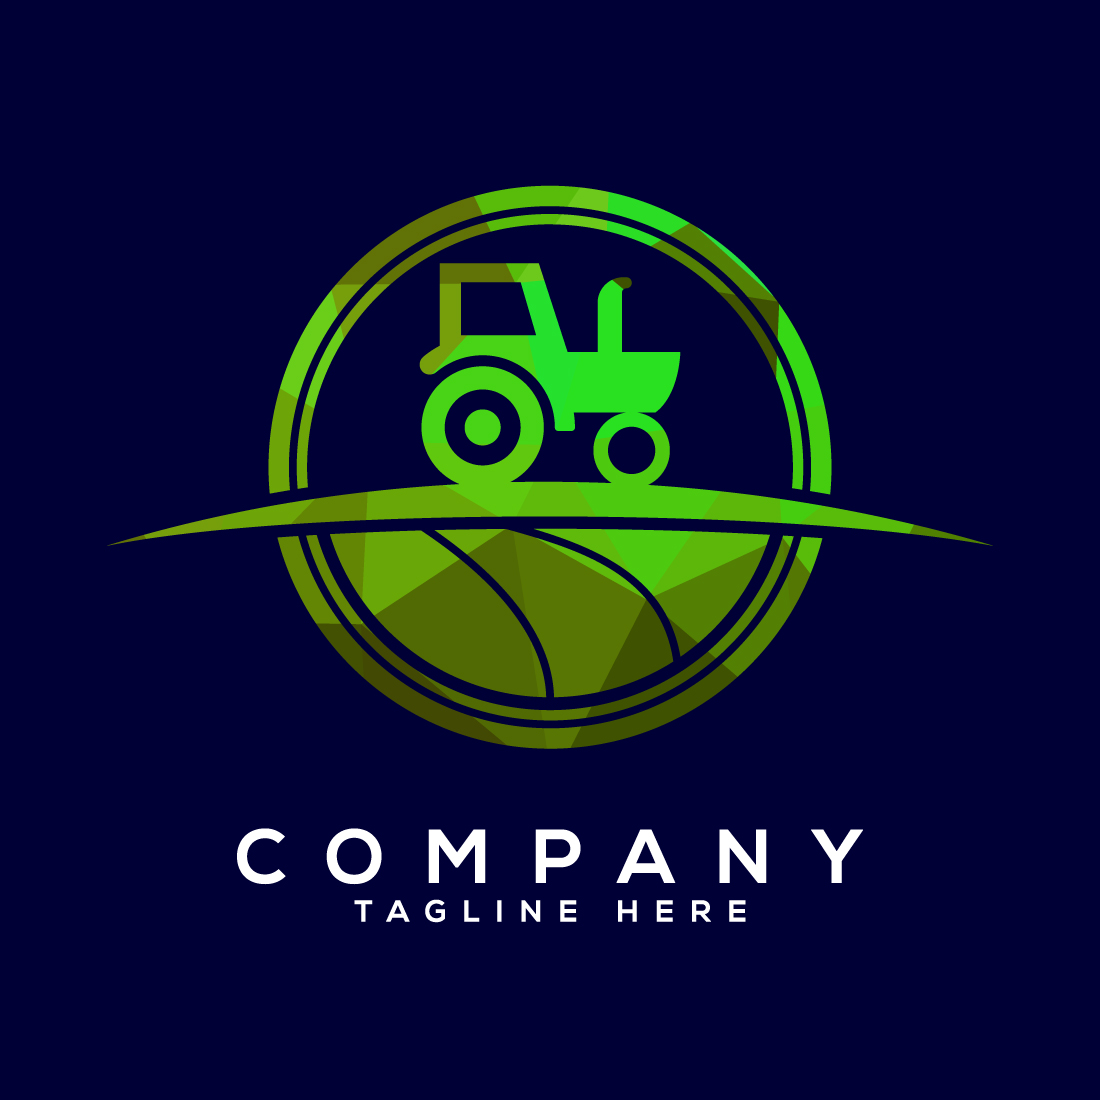 Tractor or farm low poly style logo design, suitable for any business related to agriculture industries cover image.